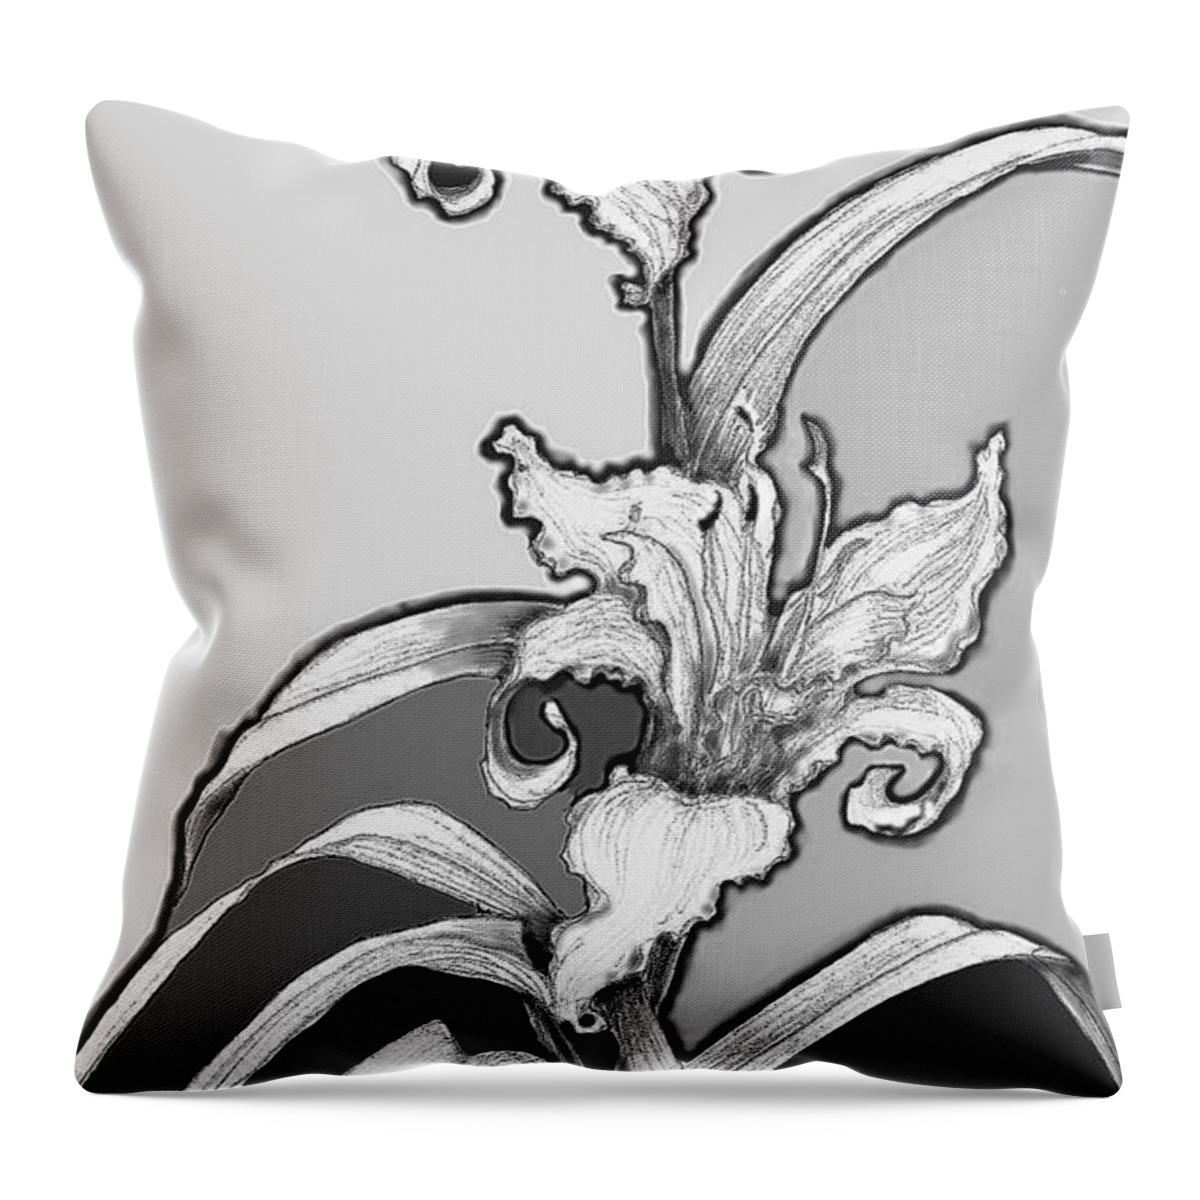 Lilies Throw Pillow featuring the digital art Day Lillies by Carol Jacobs